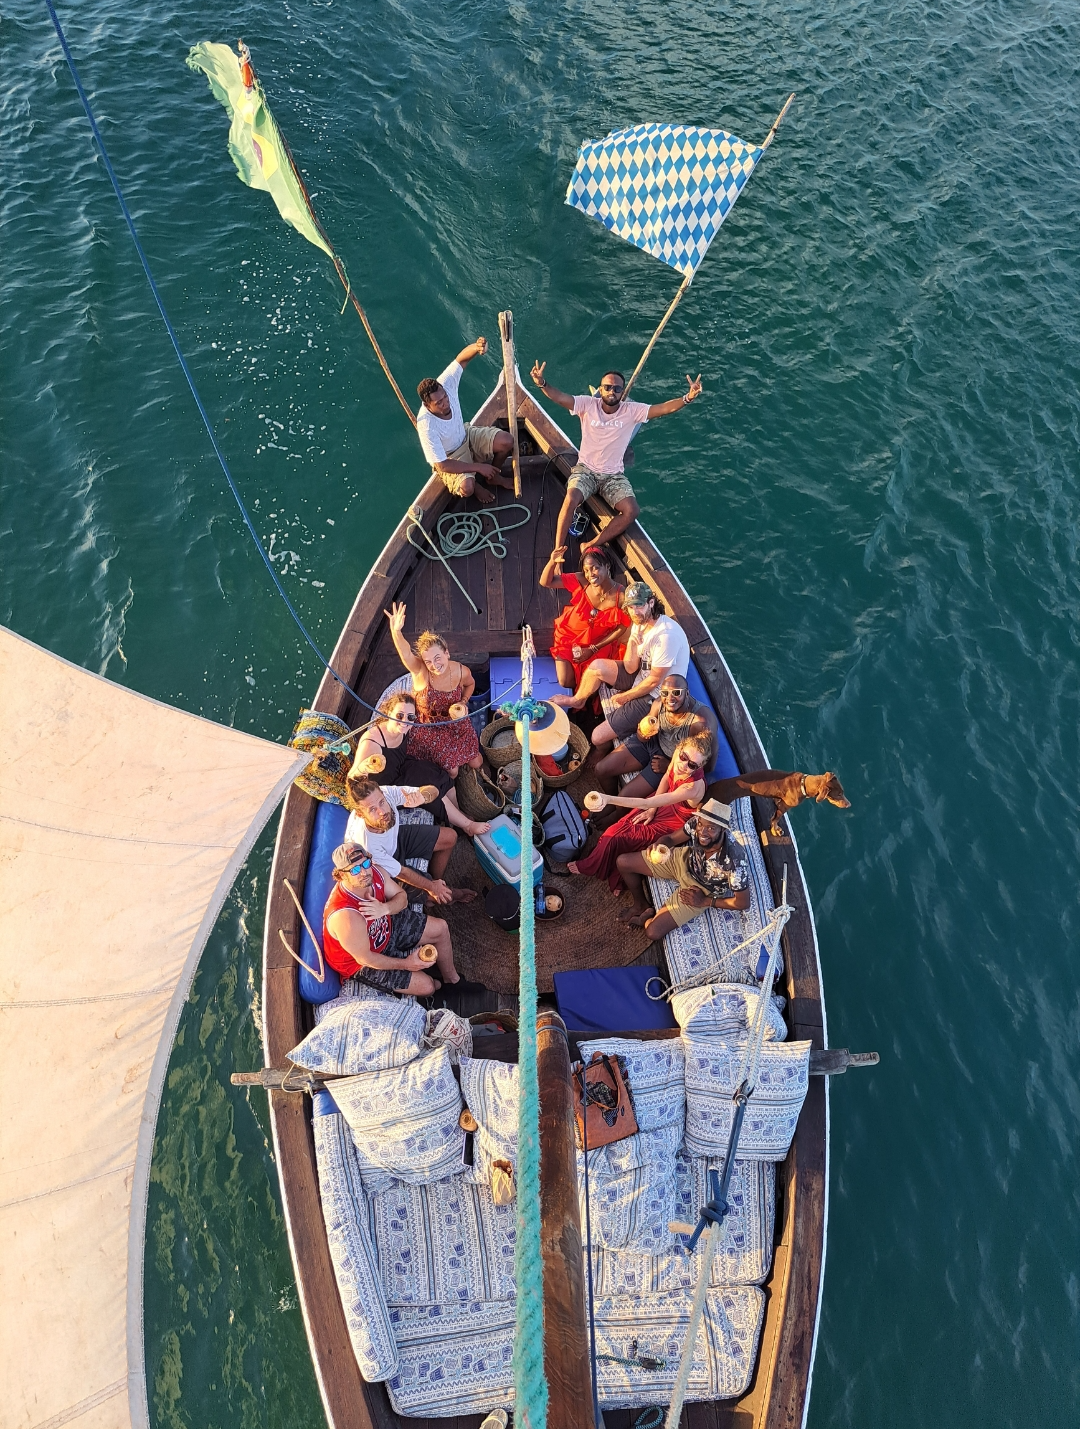 Sailing on a dhow, one of he activities of the AfricaNomads retreat for Digital Nomads